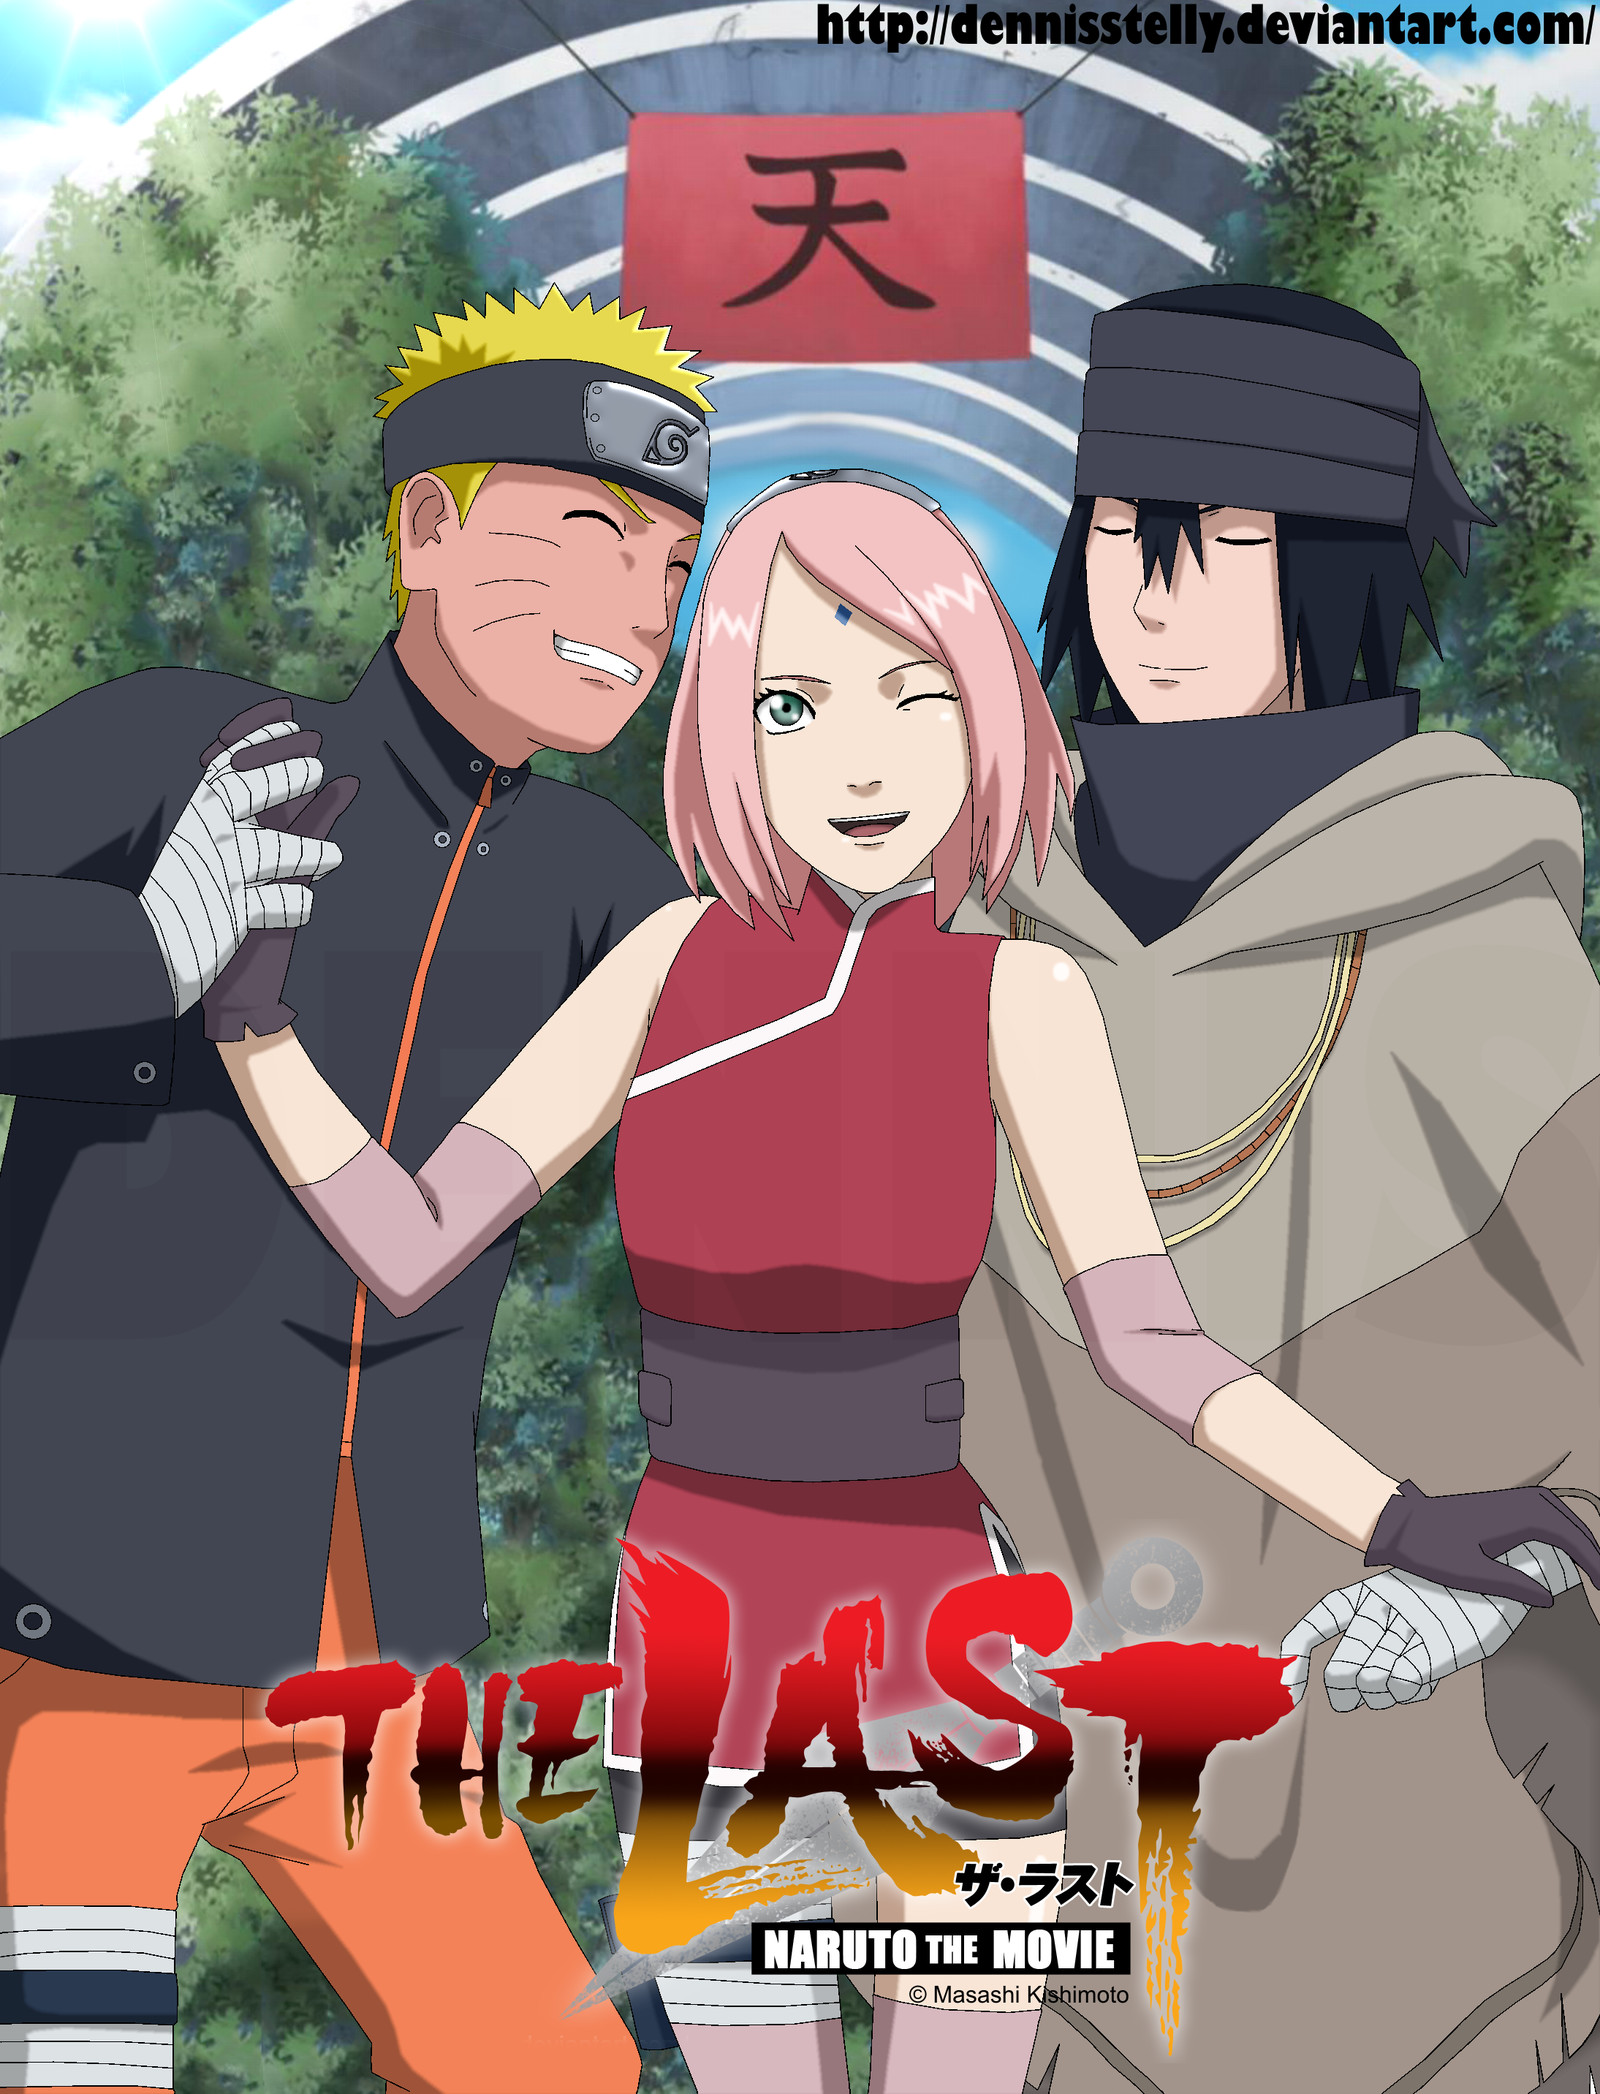 1600x2094 TheDreamVirus 215 5 Naruto the Last Movie - The Team 7 by DennisStelly